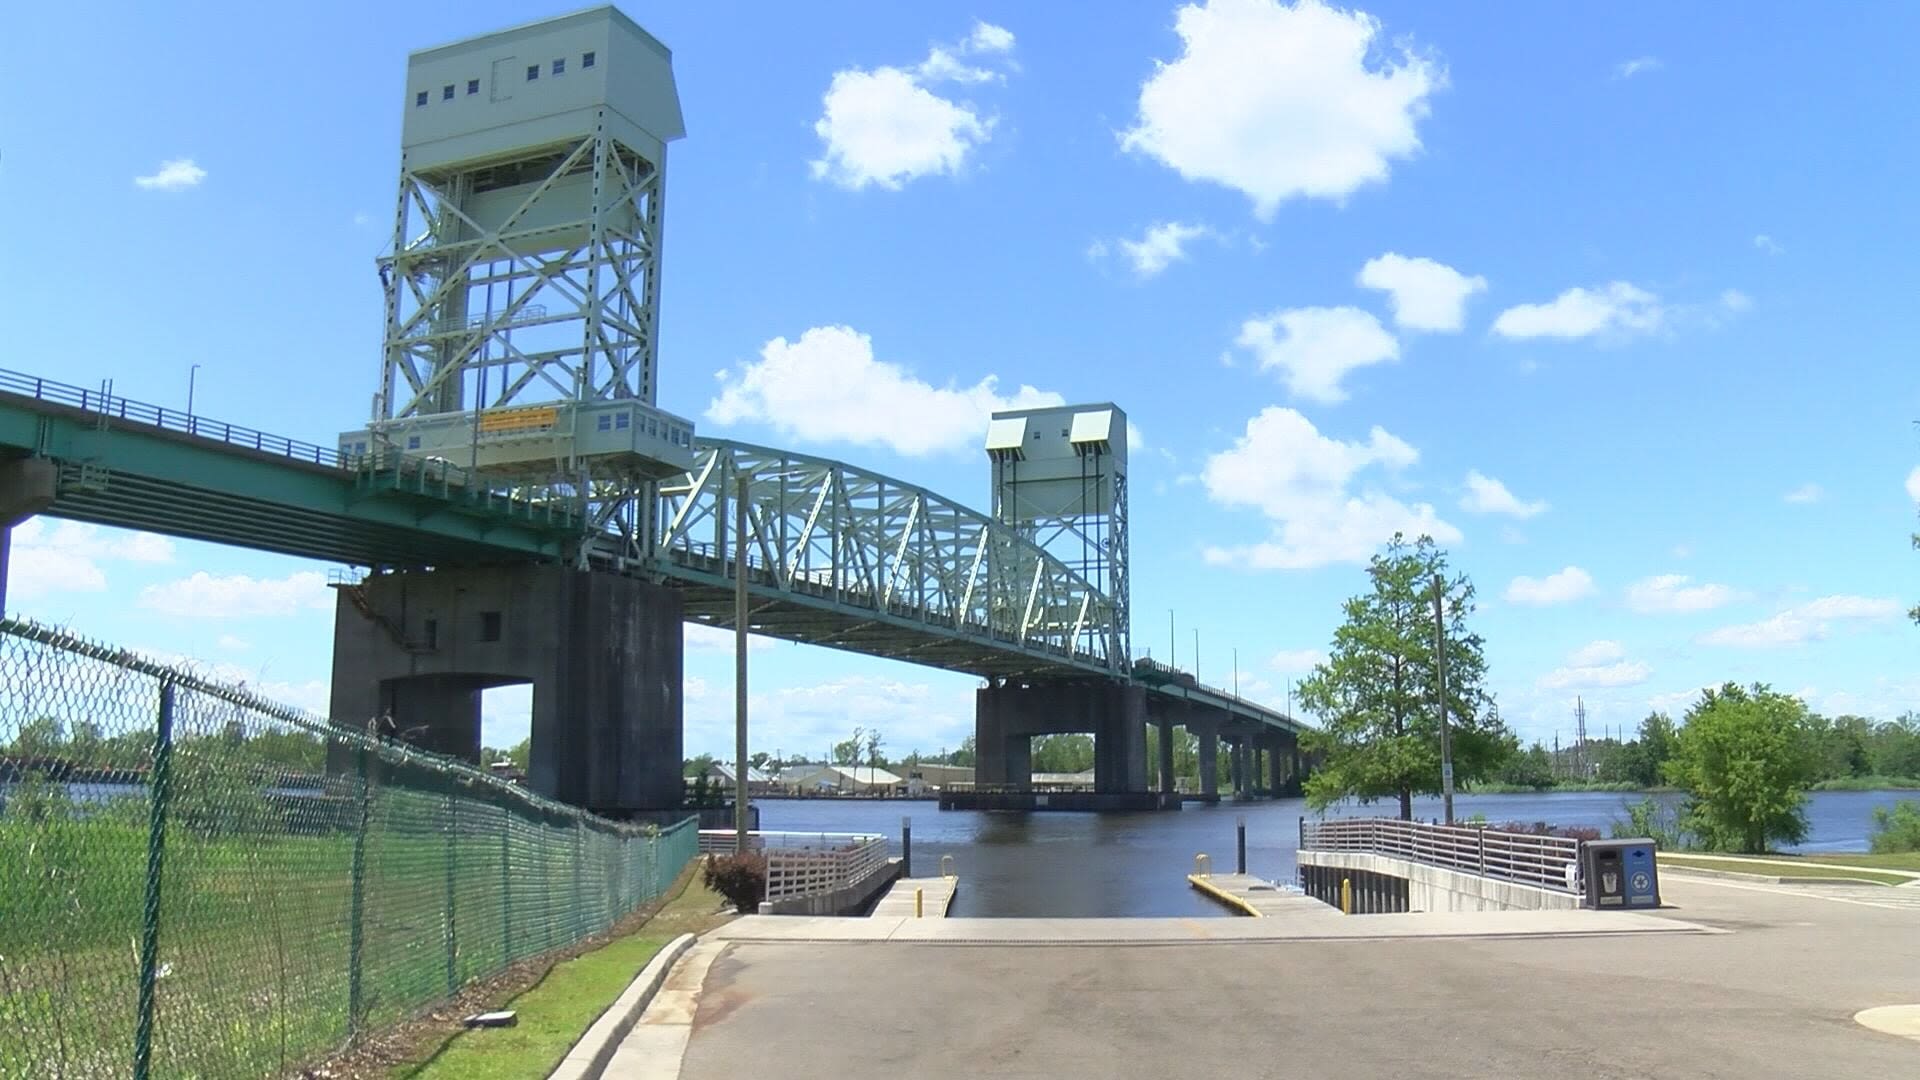 $242 million in USDOT funding awarded to help pay for Cape Fear Memorial Bridge replacement | Fox Wilmington WSFX-TV